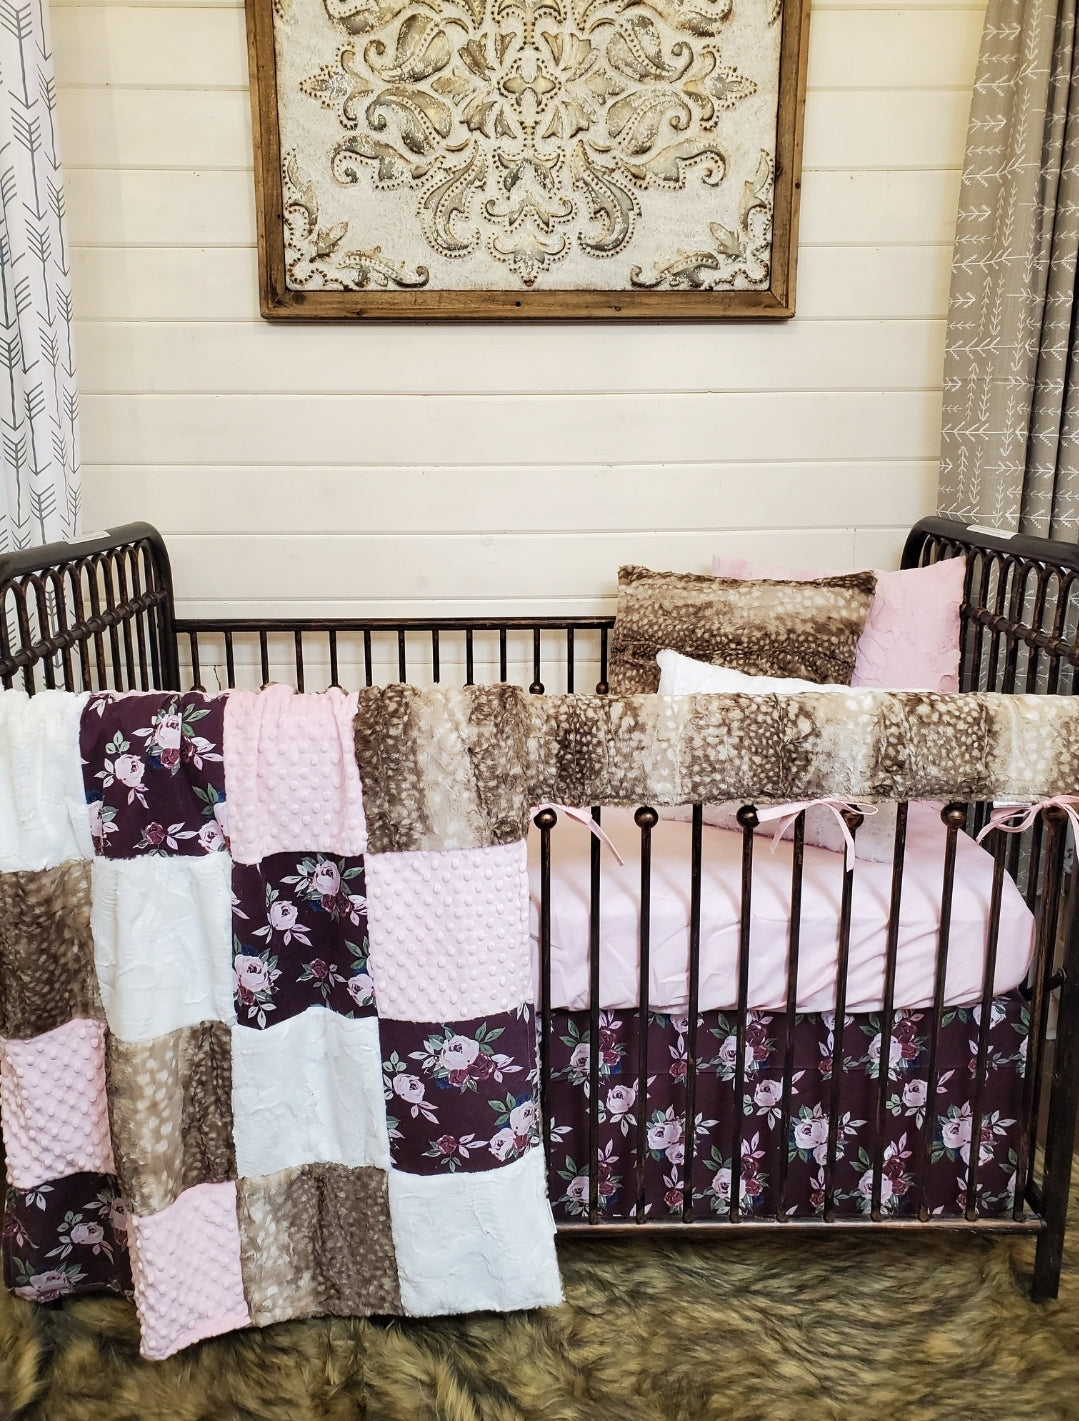 New Release Girl Crib Bedding- Maroon Floral and Fawn Minky Baby Bedding & Nursery Collection - DBC Baby Bedding Co 